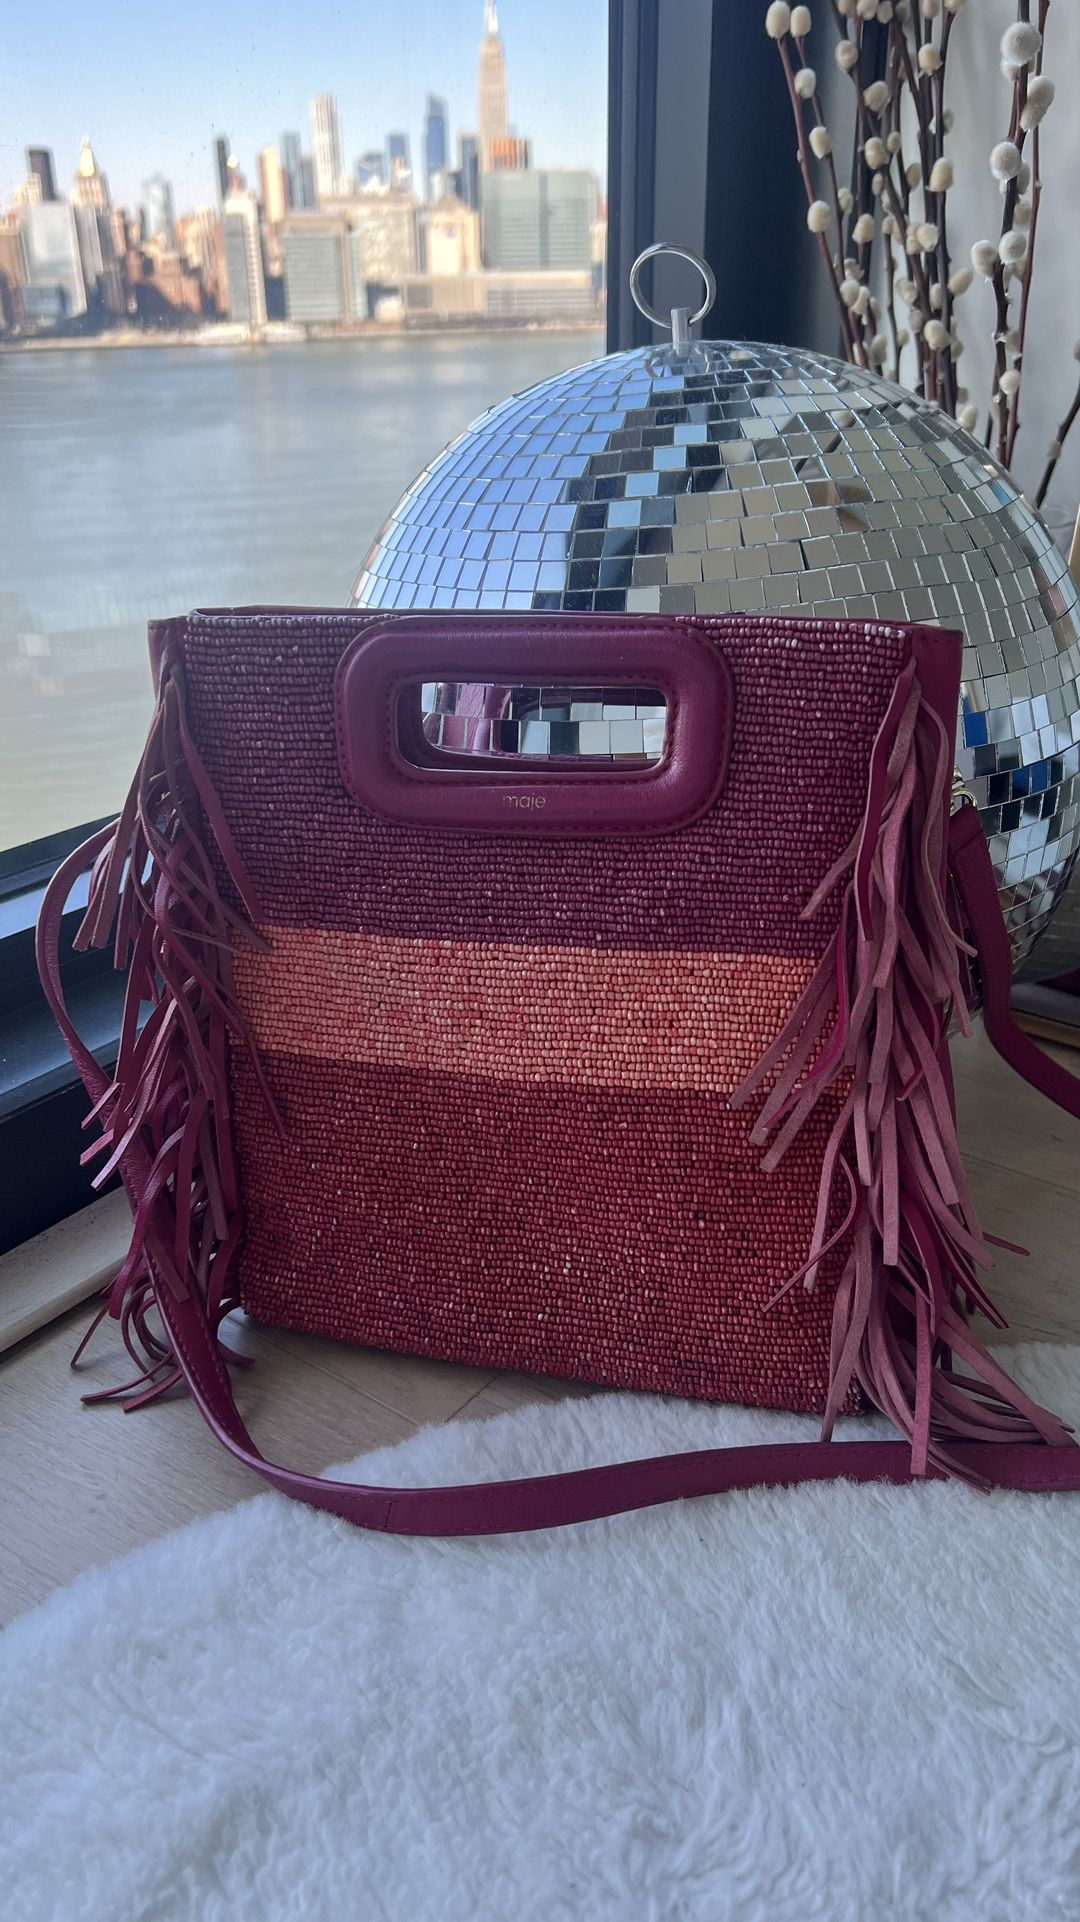 Pink leather Bag by Maje Paris for Sale in New York, NY - OfferUp